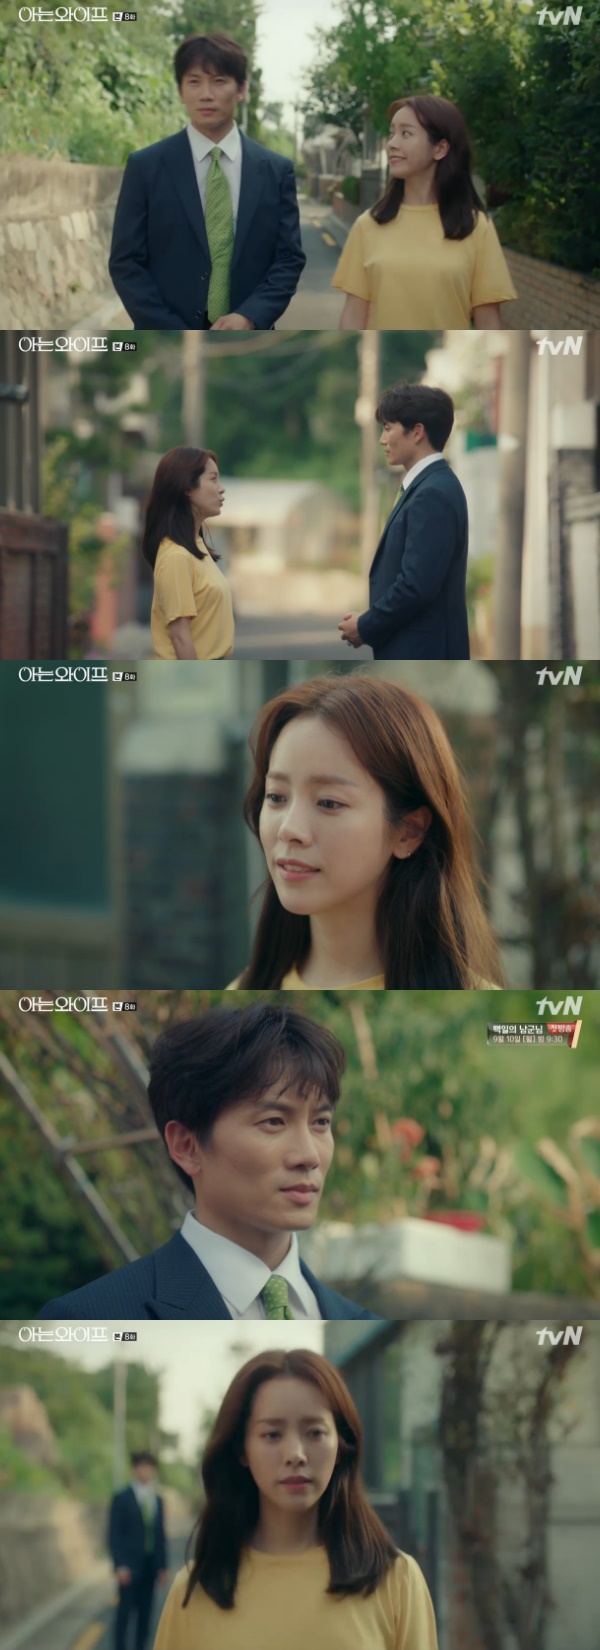 Ji Sung cheers Han Ji-mins presentIn TVNs Drama Knowing Wife, which aired on the 23rd, Cha Ju-hyuk (Ji Sung) sincerely prayed for the happiness of Seo Woo Jin (Han Ji-min).On this day, Cha Ju-hyuk resigned to return to the past after hearing that Fate is also fate that has been wrong. He told Seo Woo Jin, Good luck with the end.I have the ability to do it, and if youre in trouble, tell me, because if youre a friend, youre my brother.Seo Woo Jin then paid a monthly rent due to his fathers sacrifice; Yoon Jong-hoo (played by Jang Seung-jo) called her because he wanted to see Seo Woo Jin, but couldnt reach her.Yoon Jong-hoo, who was worried about Seo Woo Jin during the dinner, asked Cha Ju-hyuk for advice, What do you want to do?Cha Ju-hyuk said, I will be busy because it is due, but I could not hide my sorryness for Seo Woo Jin.He ran to the Way Home of Seo Woo Jin, recalling the fact that he had not been able to get his father-in-laws date in the past.Cha Ju-hyuk, who put his drink in front of the front door of his wifes house, said, Its too late, my father-in-law. Please calm your heart and mother-in-law.Cha Ju-hyuk, who discovered the Sea Woo Jin who was returning to The Way Home, was surprised to hear that his mother-in-law was missing and headed to the police station.After completing the missing persons report, Cha Ju-hyuk posted on social media that he was looking for people, calmly asking the anxious Seo Woo Jin to find it.Thanks to Cha Ju-hyuks SNS, I was able to find Woojins mother who was serving in a free lunch center.So Seo Woo Jin said, If it wasnt for you this time, I would have been so scared.And Im depended on someone else to be there, and Im serious.Cha Ju-hyuk opened up about the number 0 that Seo Woo Jin liked, saying, I regret and miss why I did not do better after leaving me and why I did not know why I was so precious.I want to pray for happiness with my heart. Im not good at heart-bending, Im not sure Im going to be right about it this time, because Im not going to be right about it.I have lived my life for 30 years, so this time I will try to pray with my heart like you say. Cha Ju-hyuk was embarrassed by the meaningful words of Seo Woo Jin, and she said, I really appreciated today, so Ill see you on Monday. Watch your driving.Later, Seo Woo Jin broke up with Cha Ju-hyuk, wrapping his head in confusion.Meanwhile, Cha Ju-hyuks wife, Lee Hye-won (Kang Han-Na), expressed anger at Cha Ju-hyuk, who lied about going to the funeral home, raising tension in the play.